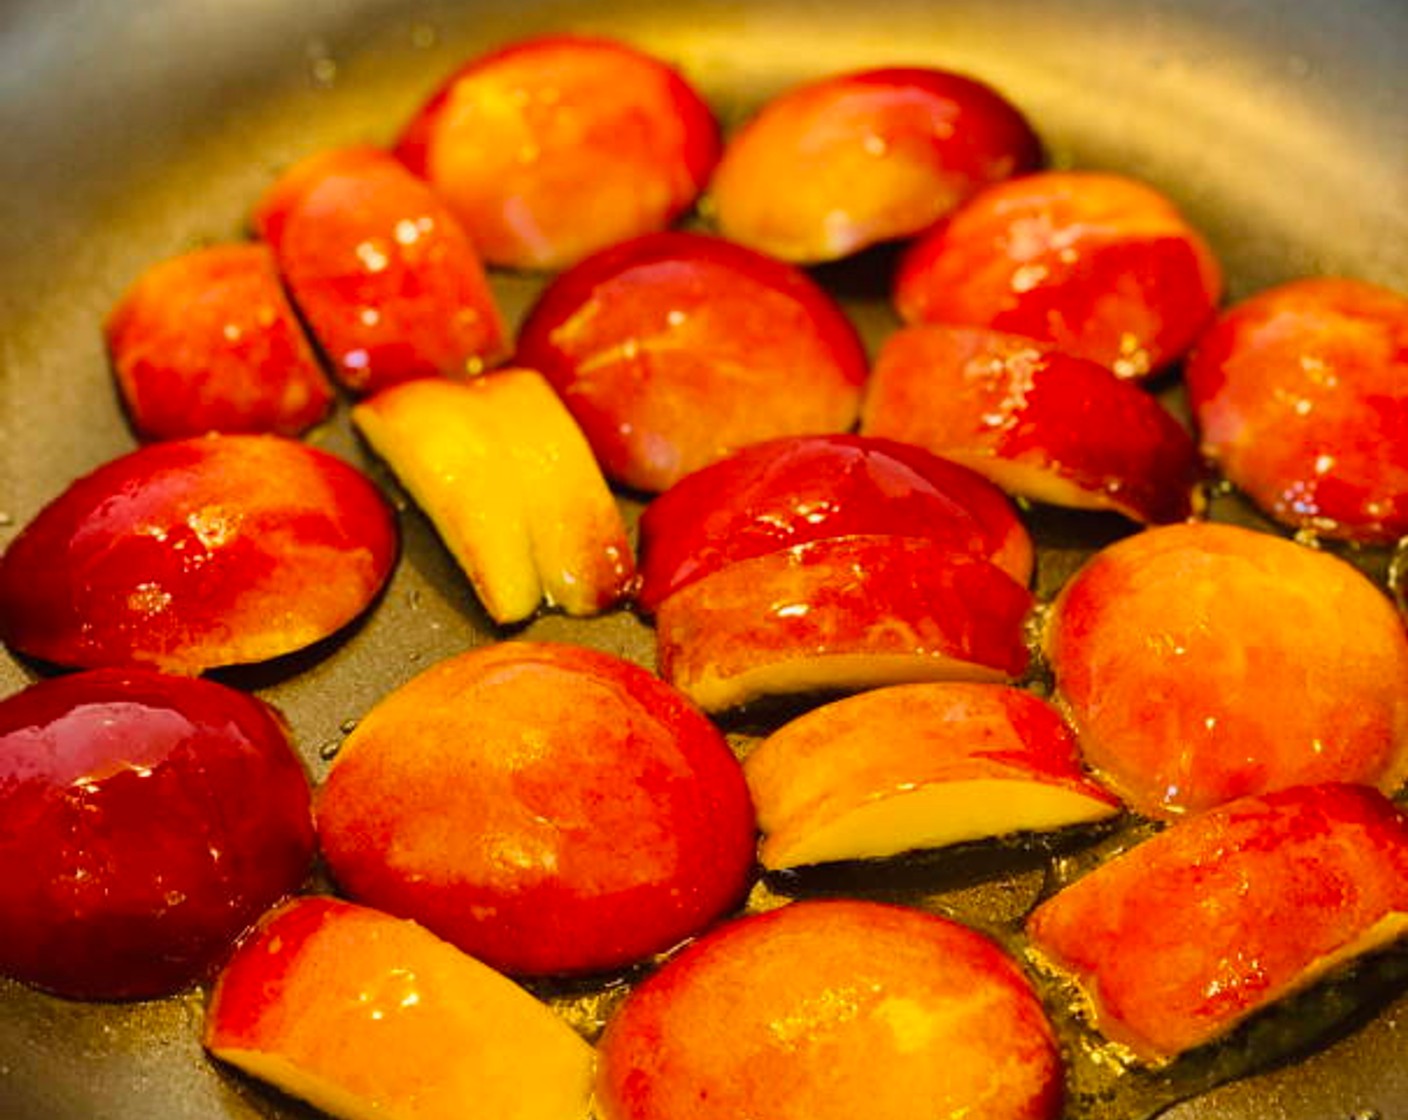 step 6 Place the Peaches (3) face down and fry or grill for a few minutes on each side until golden brown or grill marks appear. Once the peaches are lightly cooked just to soften them, remove them from the heat.